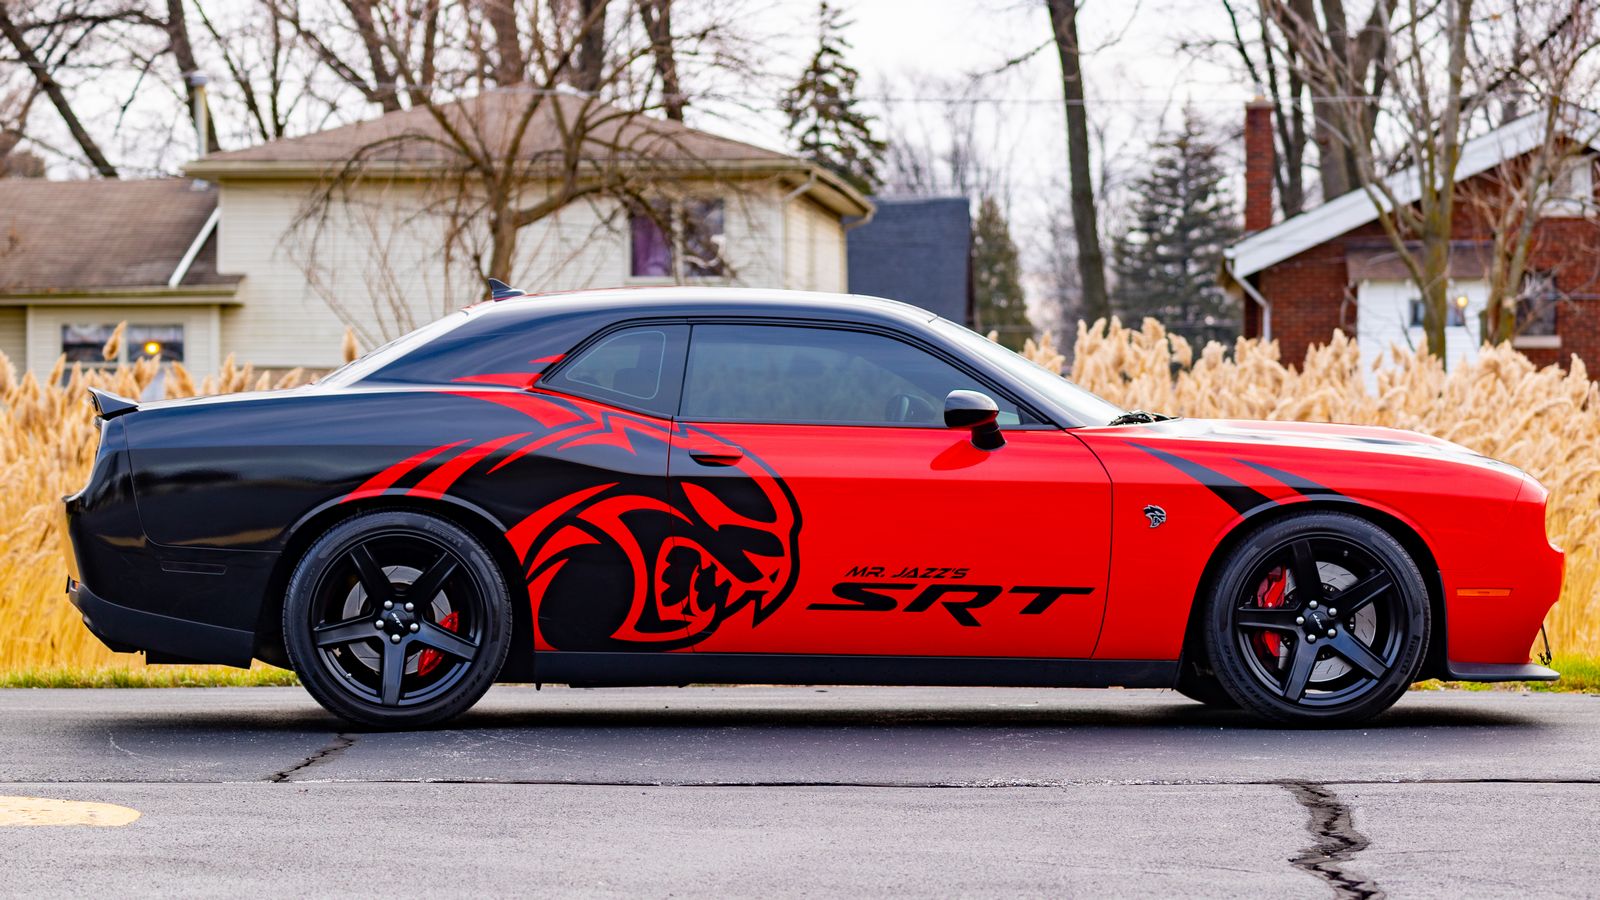 The 2023 Dodge Challenger: An Epic Muscle Car